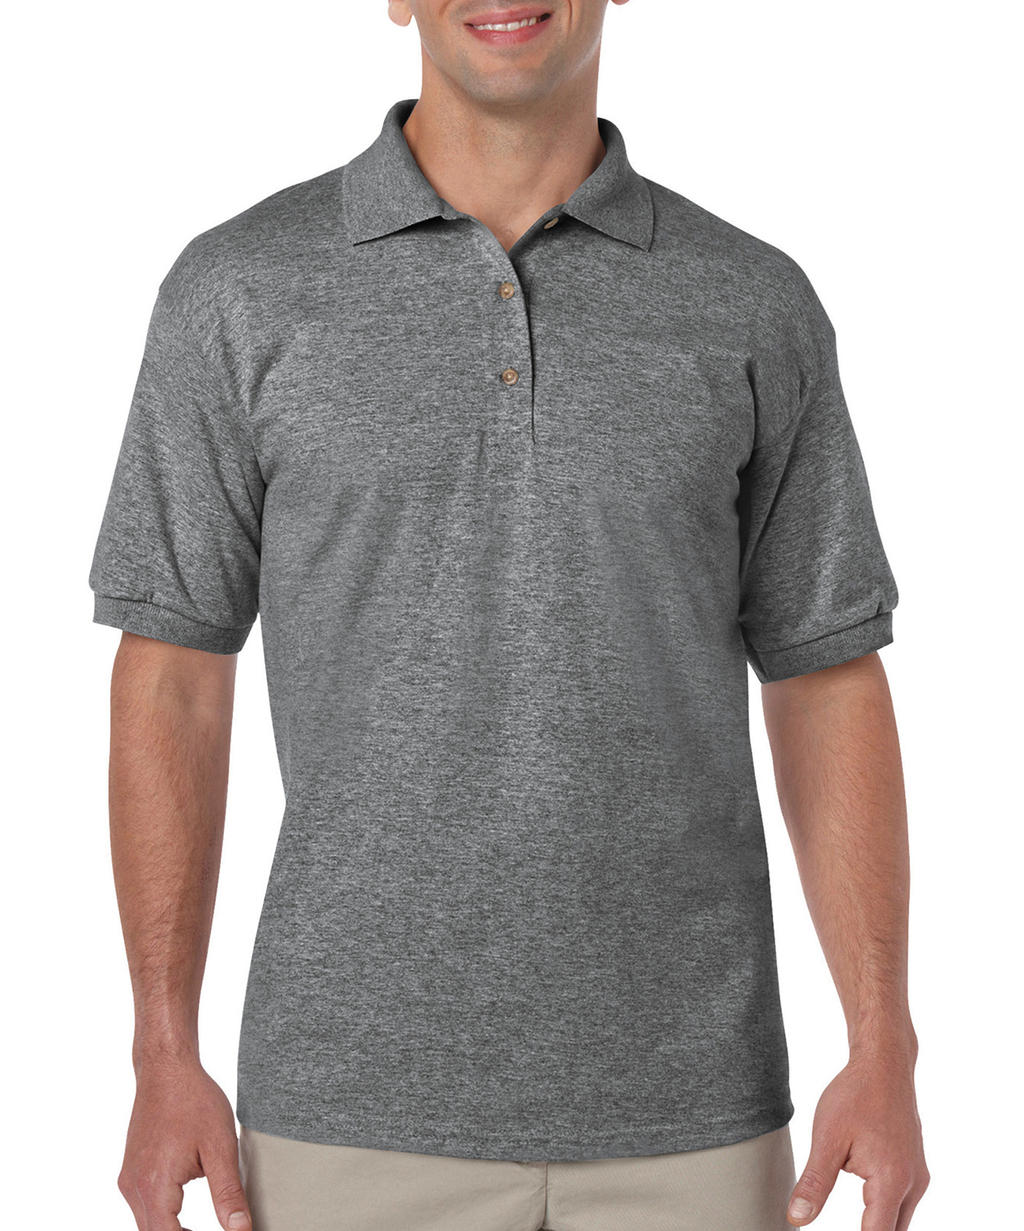  DryBlend Adult Jersey Polo in Farbe Graphite Heather